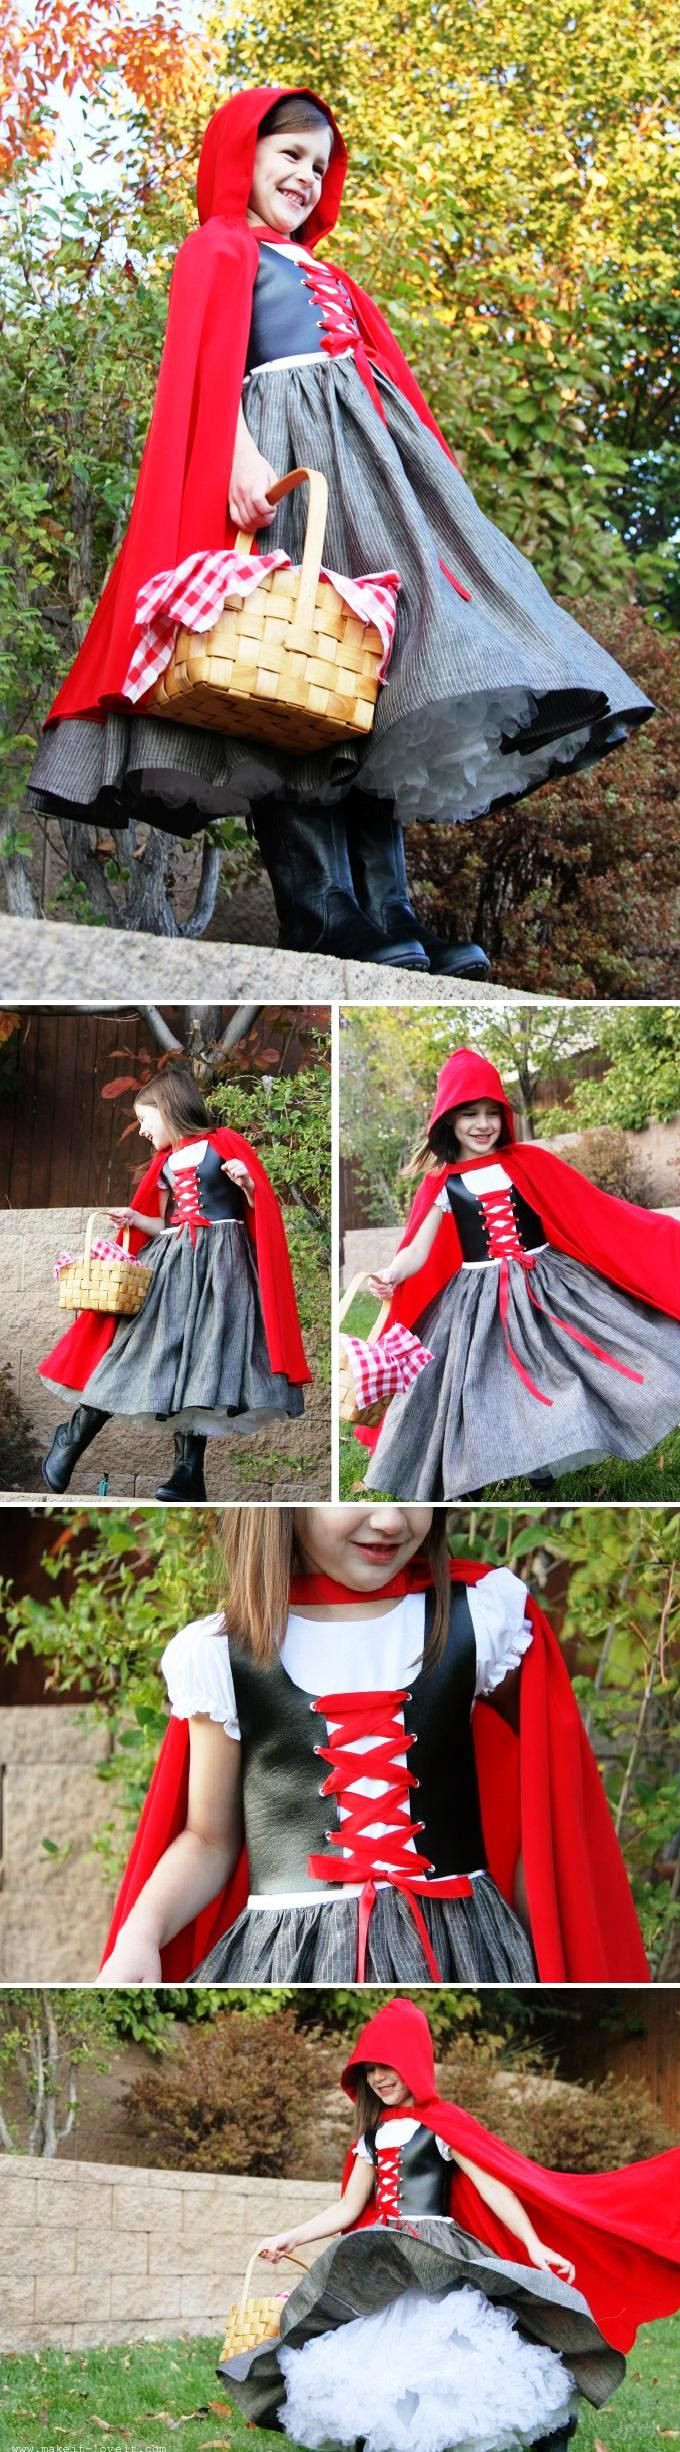 Little Red Riding Hood Costume DIY
 Little Red Riding Hood DIY Halloween Costume Make your